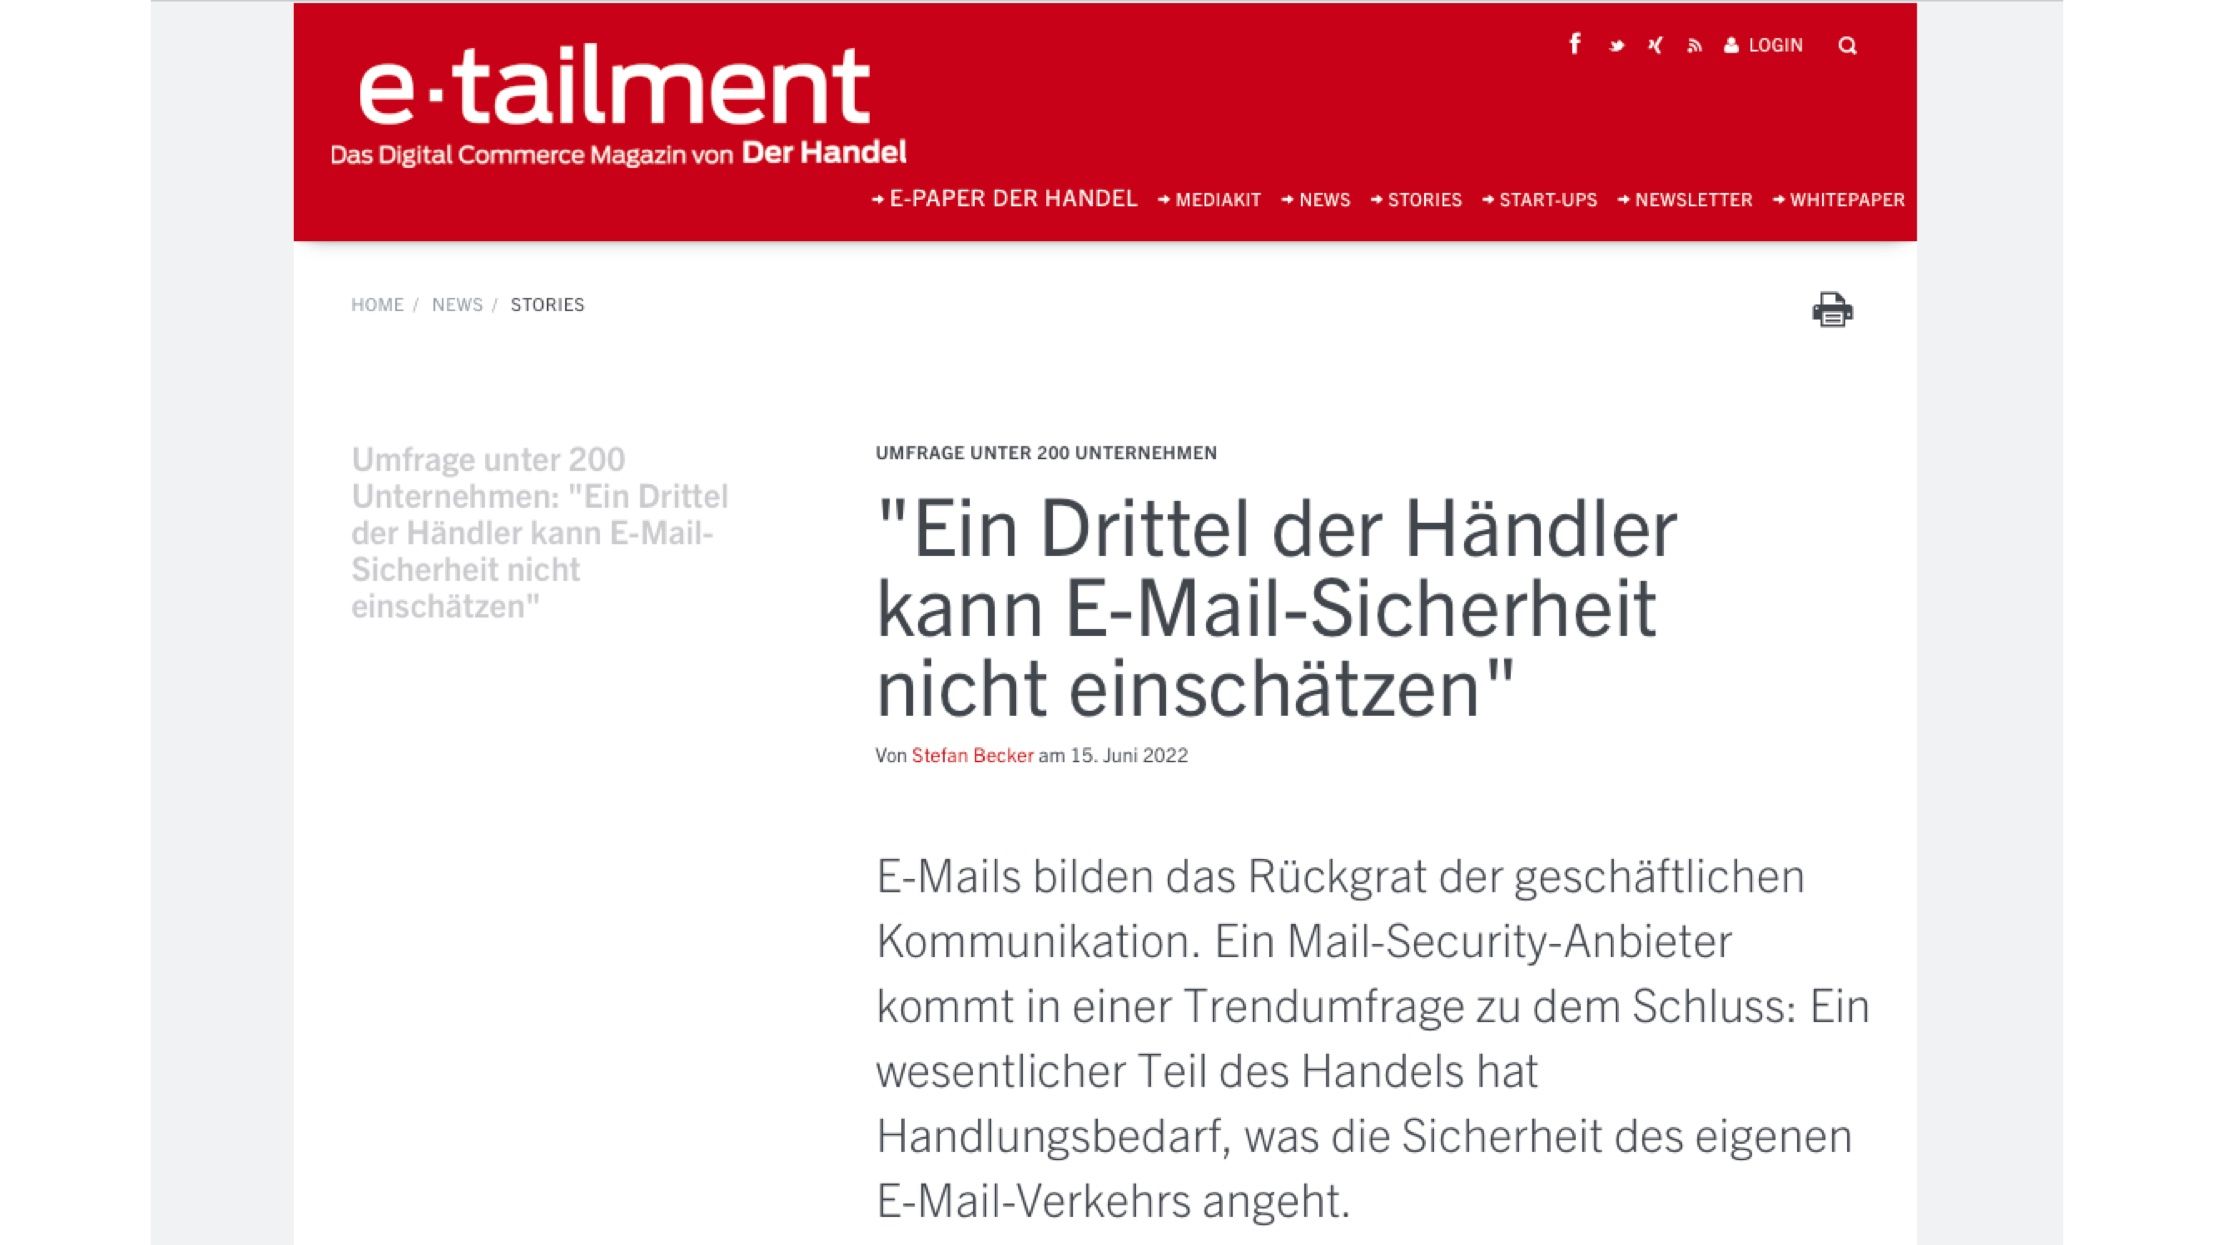 Artikel """One-third of retailers can't assess email security"" in der e-tailment